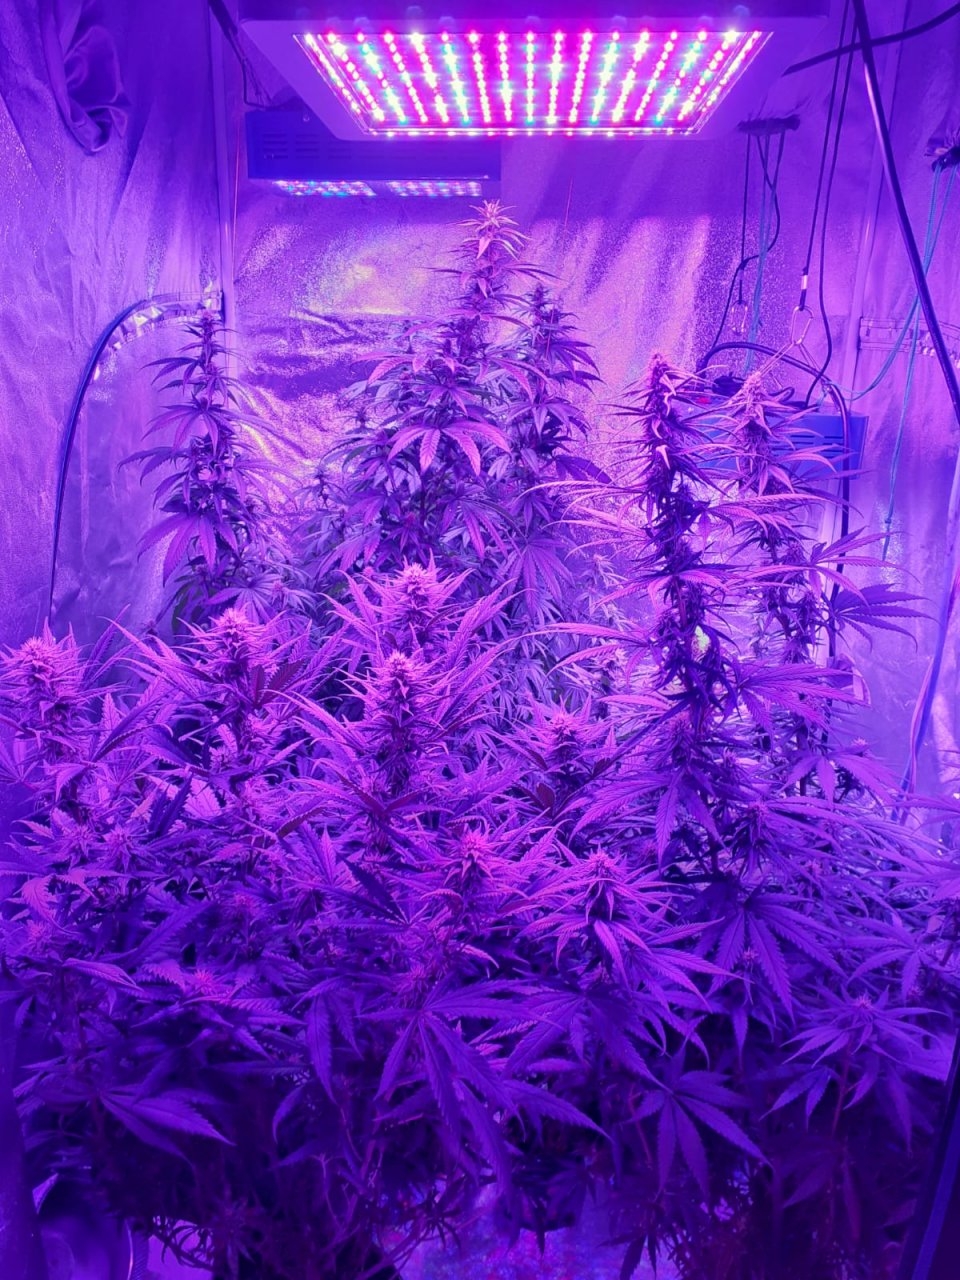 End of 5th week flower in 39x39 tent